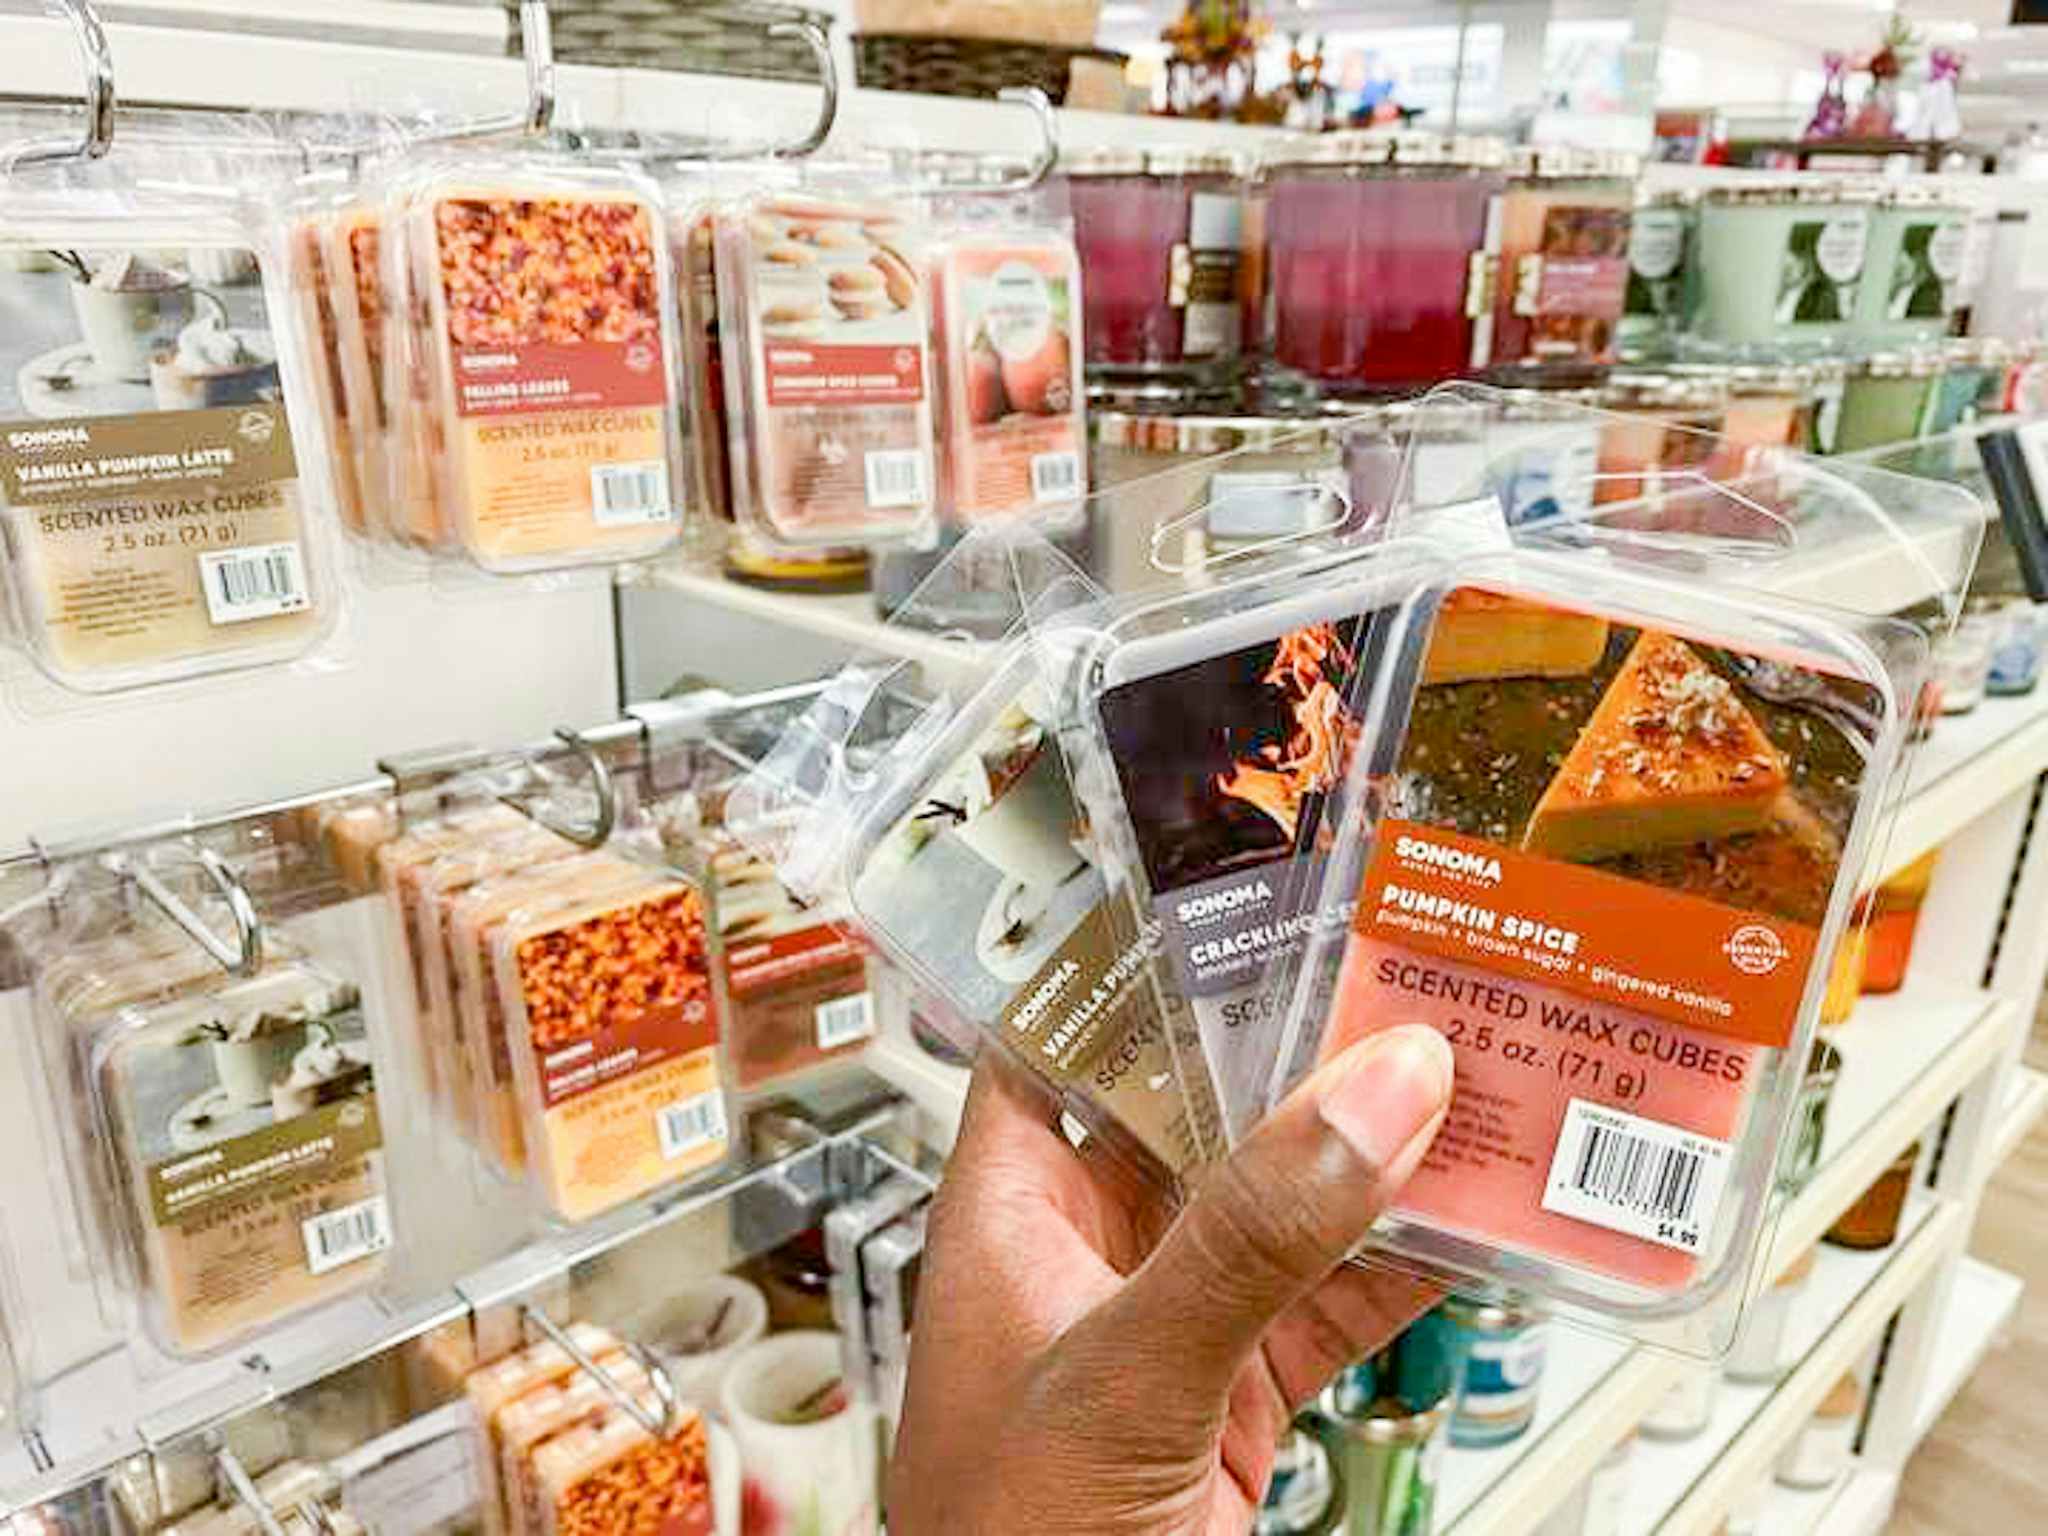 kohls sonoma goods for life fall wax melts in store image 2021 1